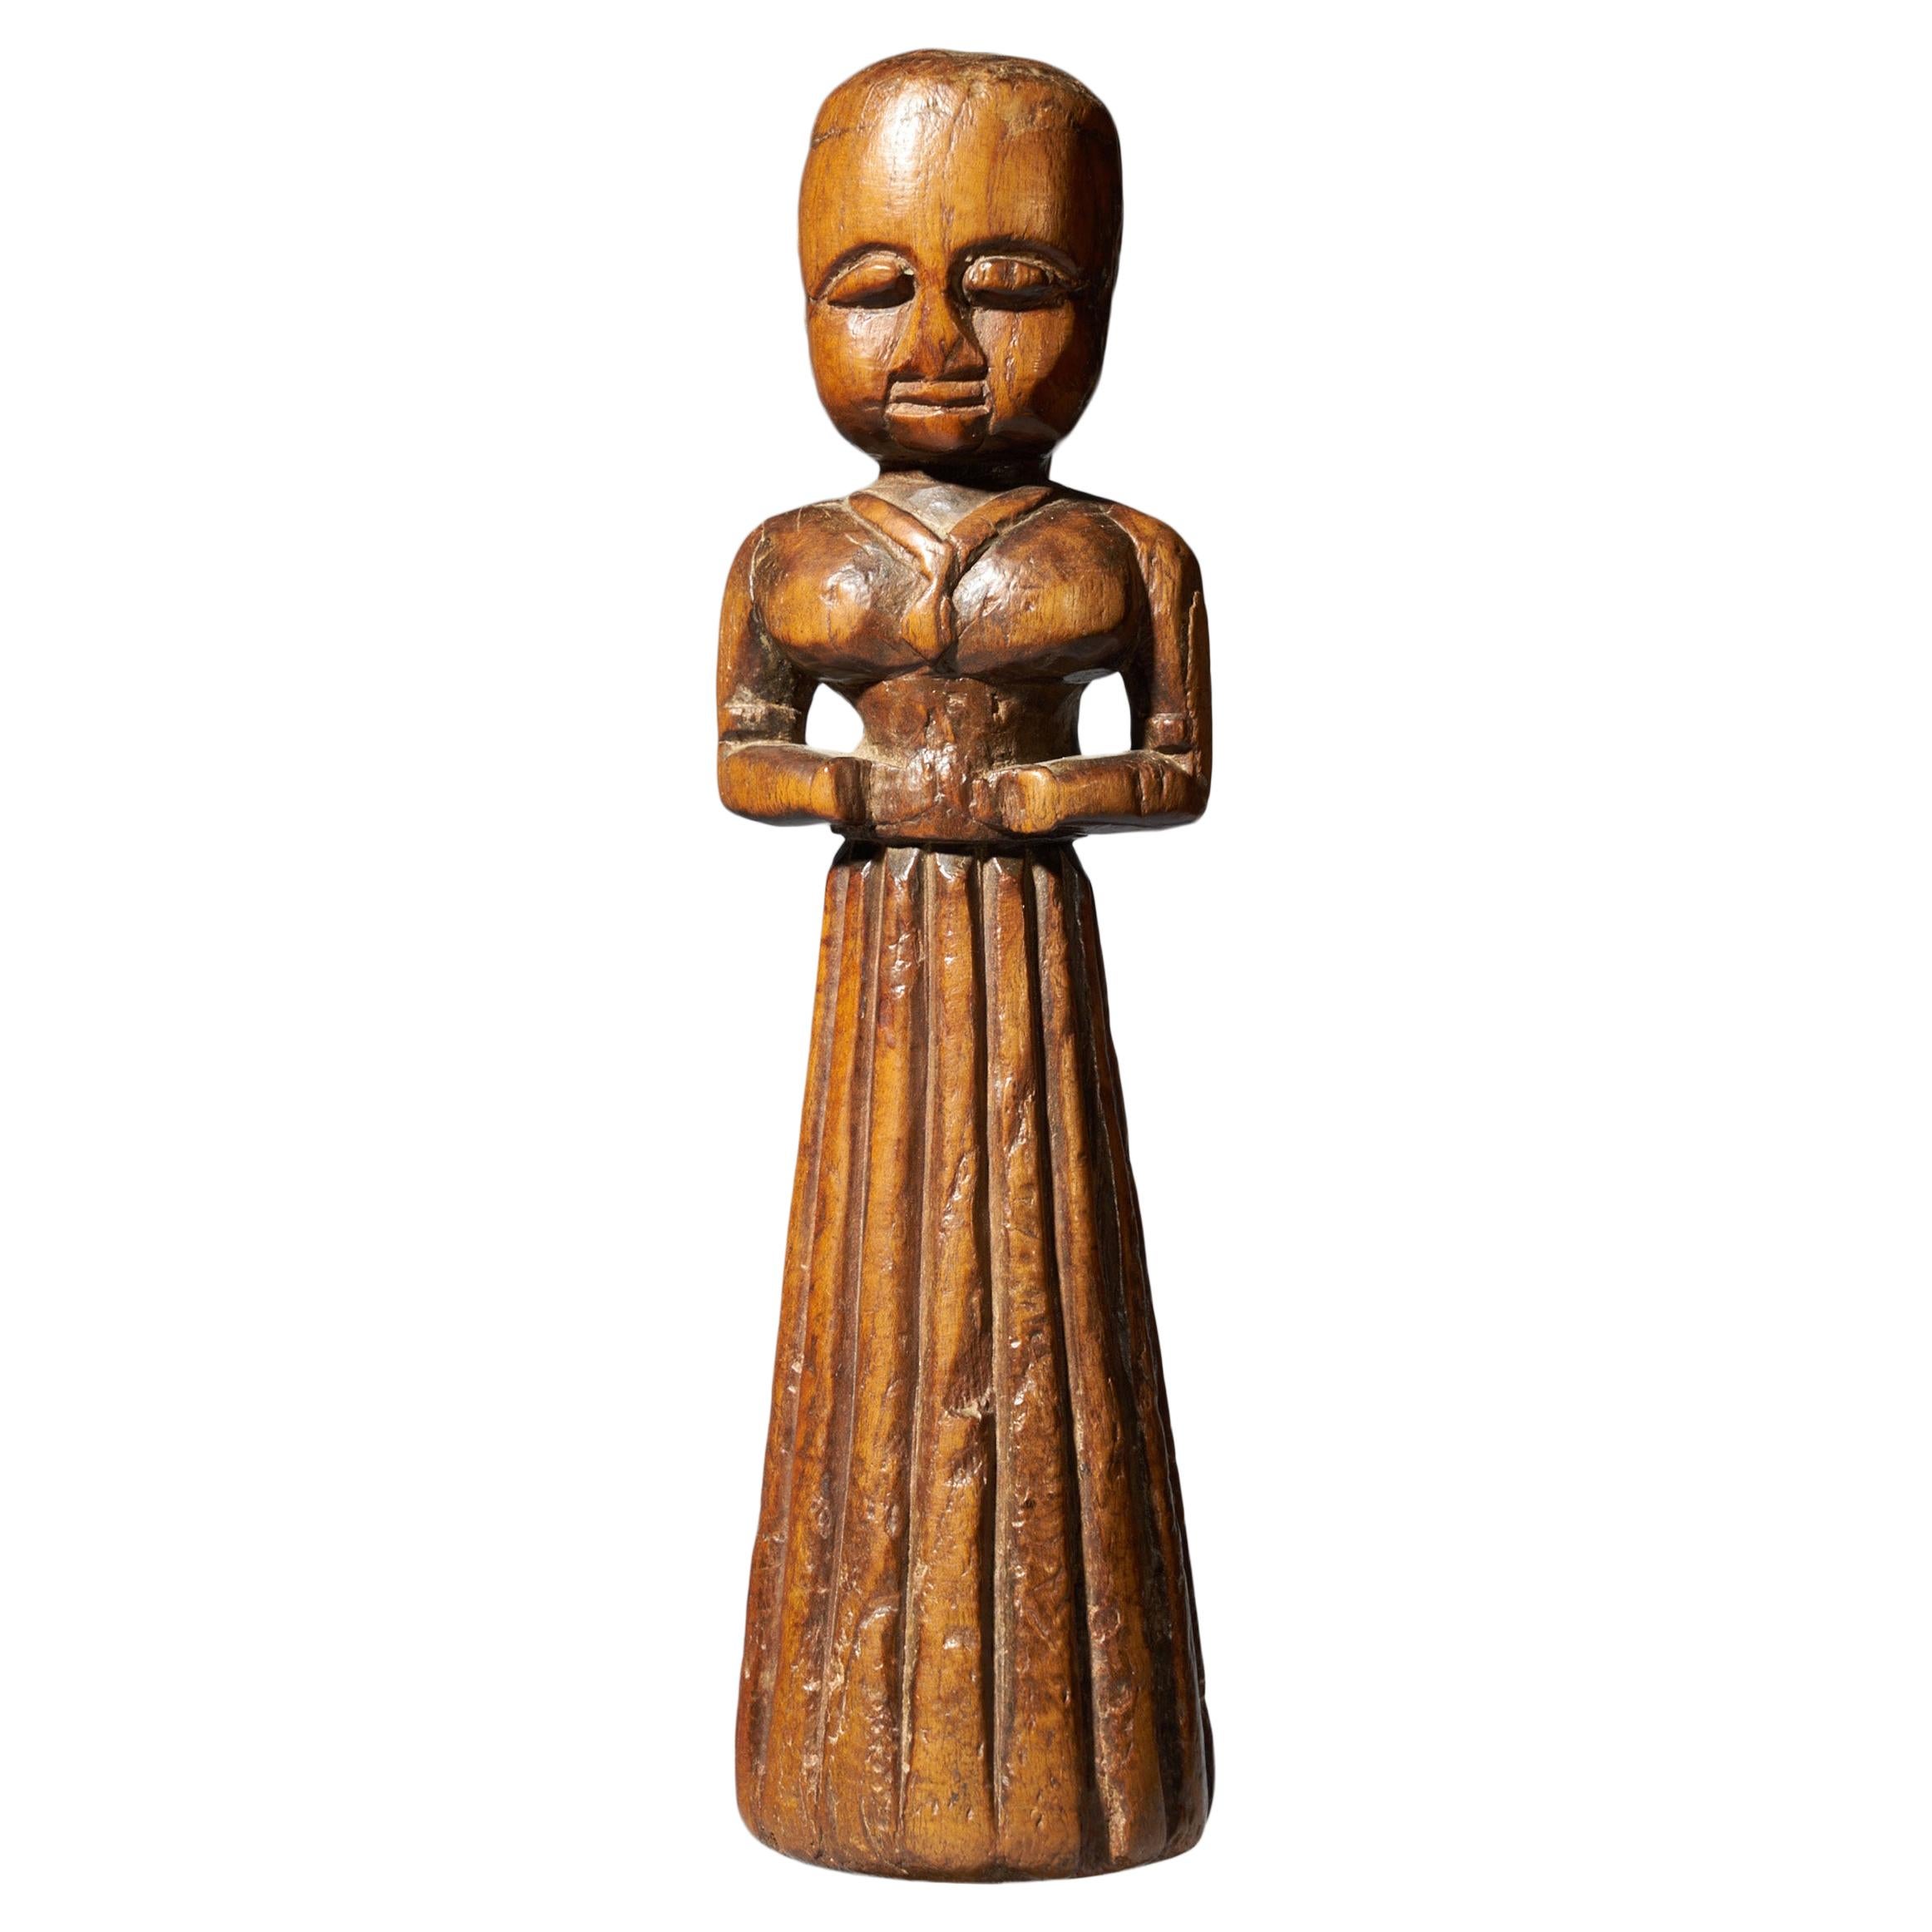 Gujurat Region, North India, Statue of a Woman in a Long Skirt